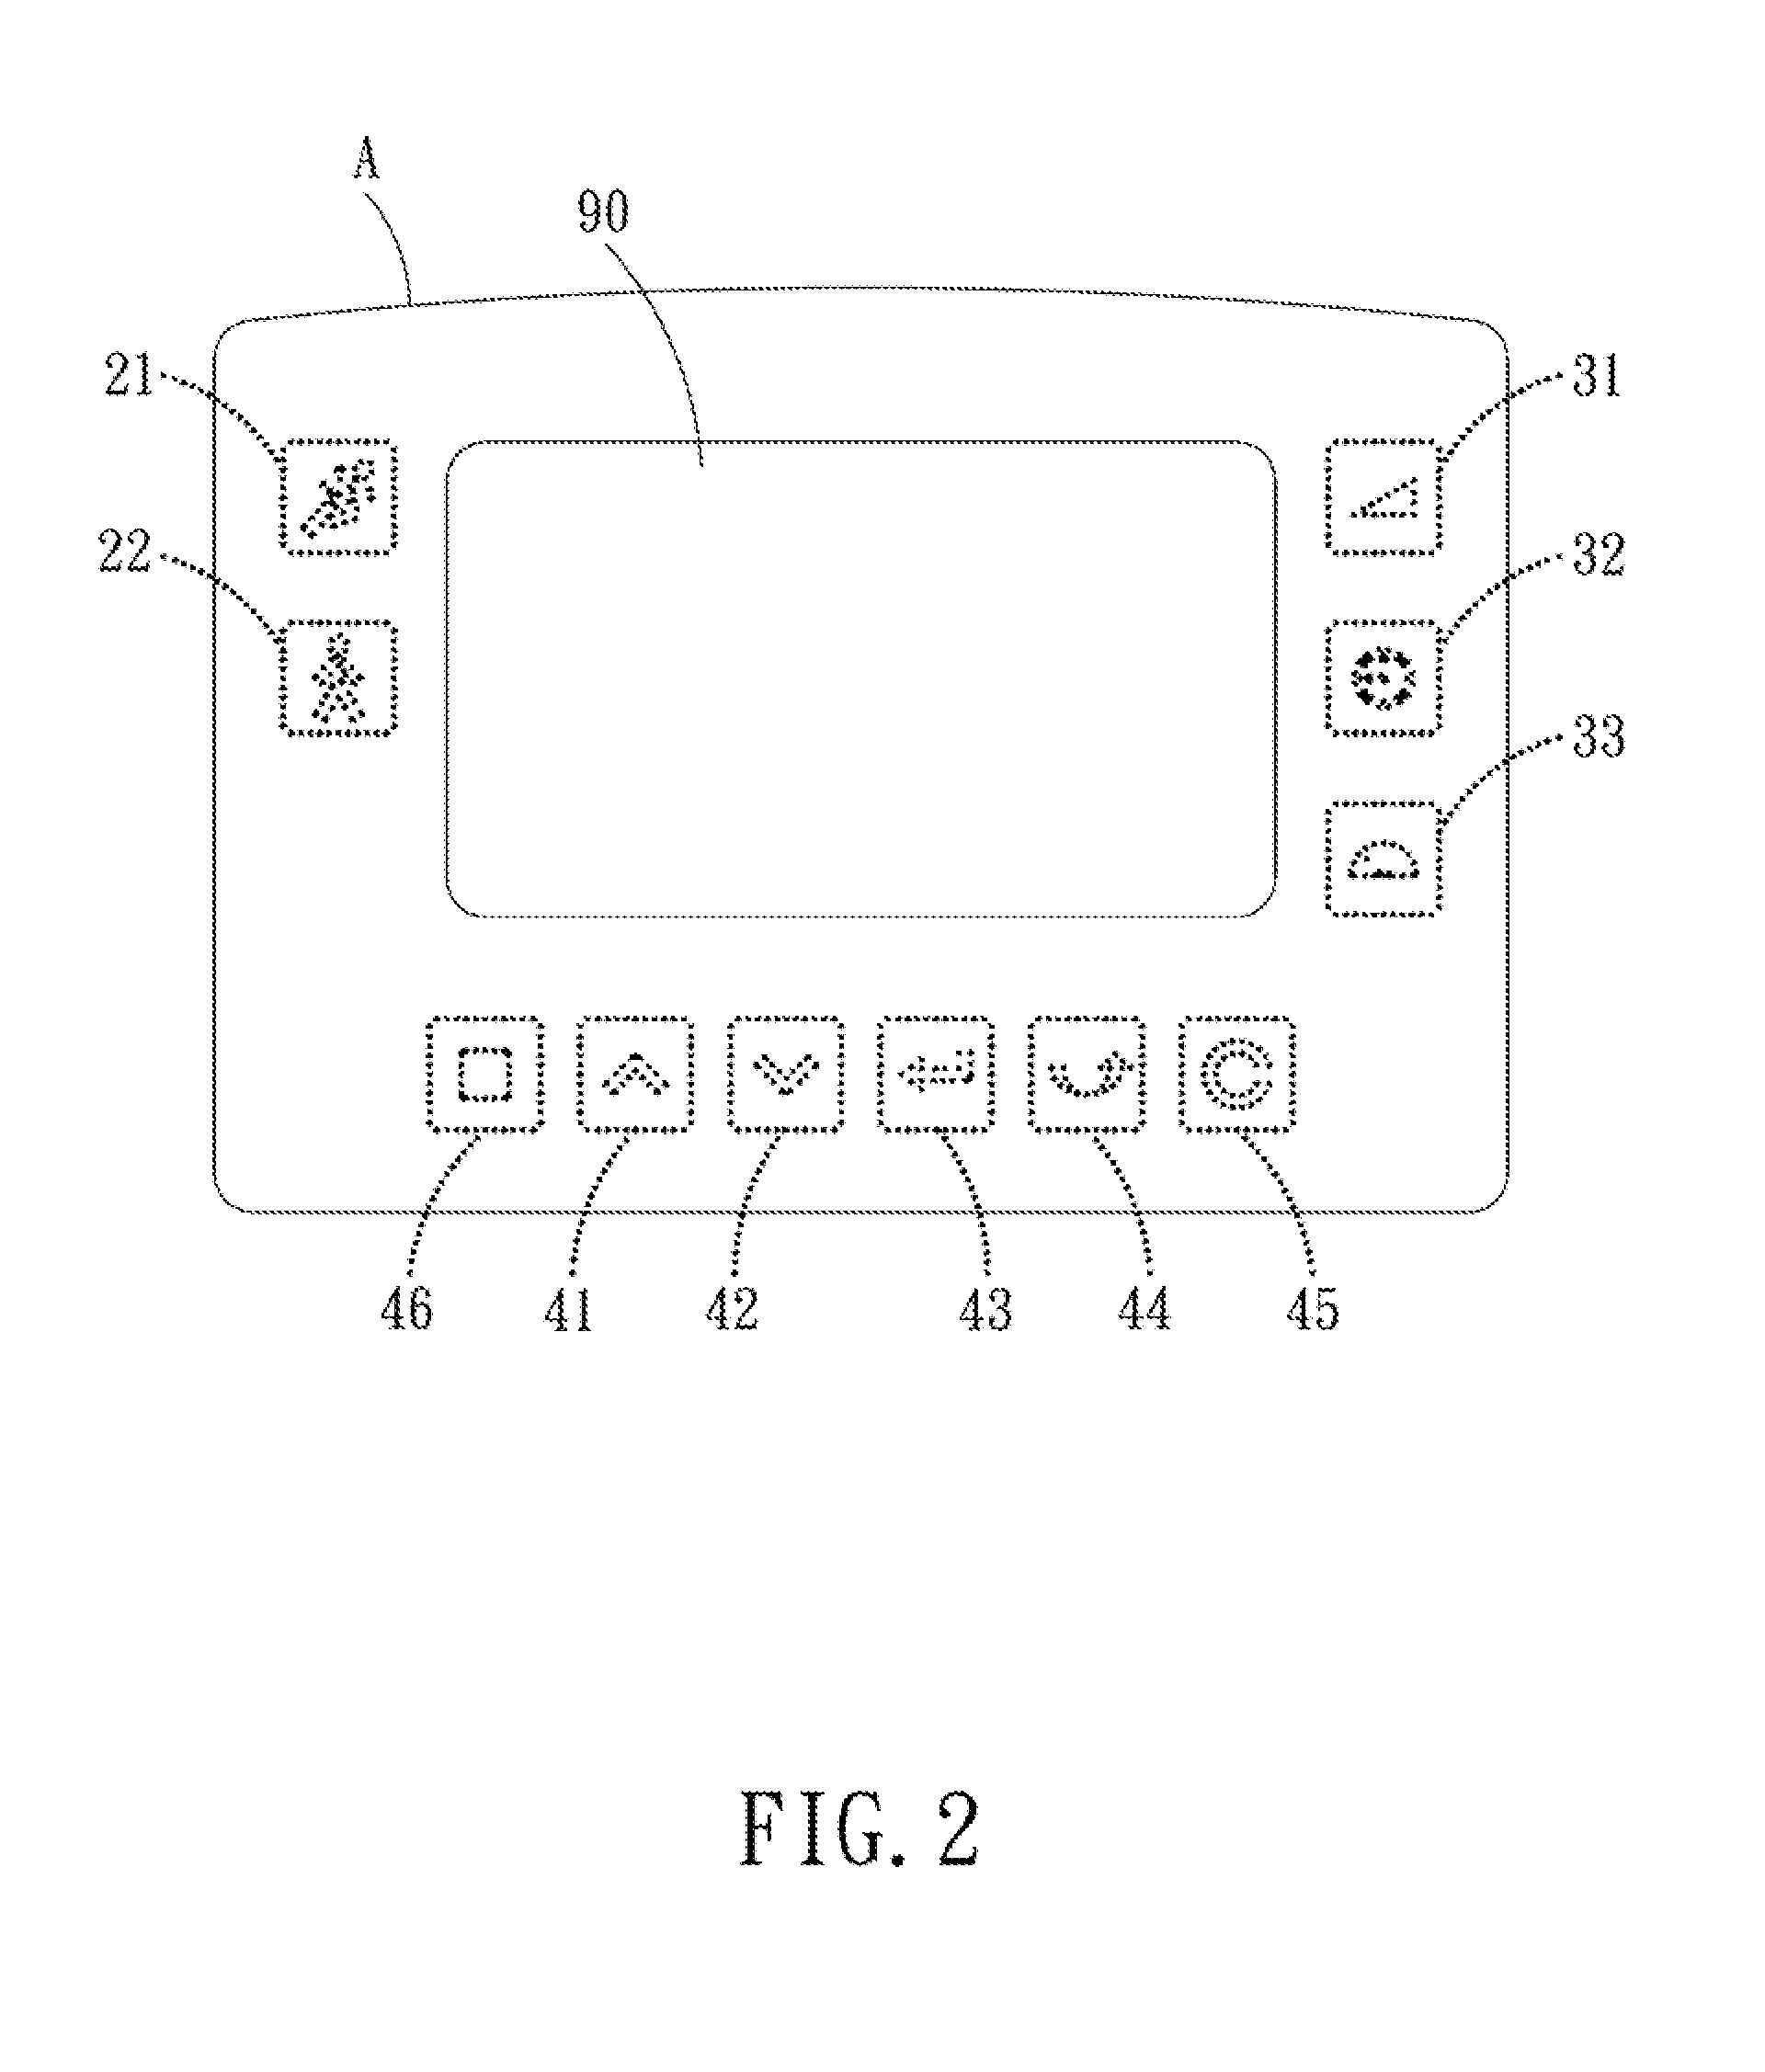 Function setting method for a control panel of an exercise equipment